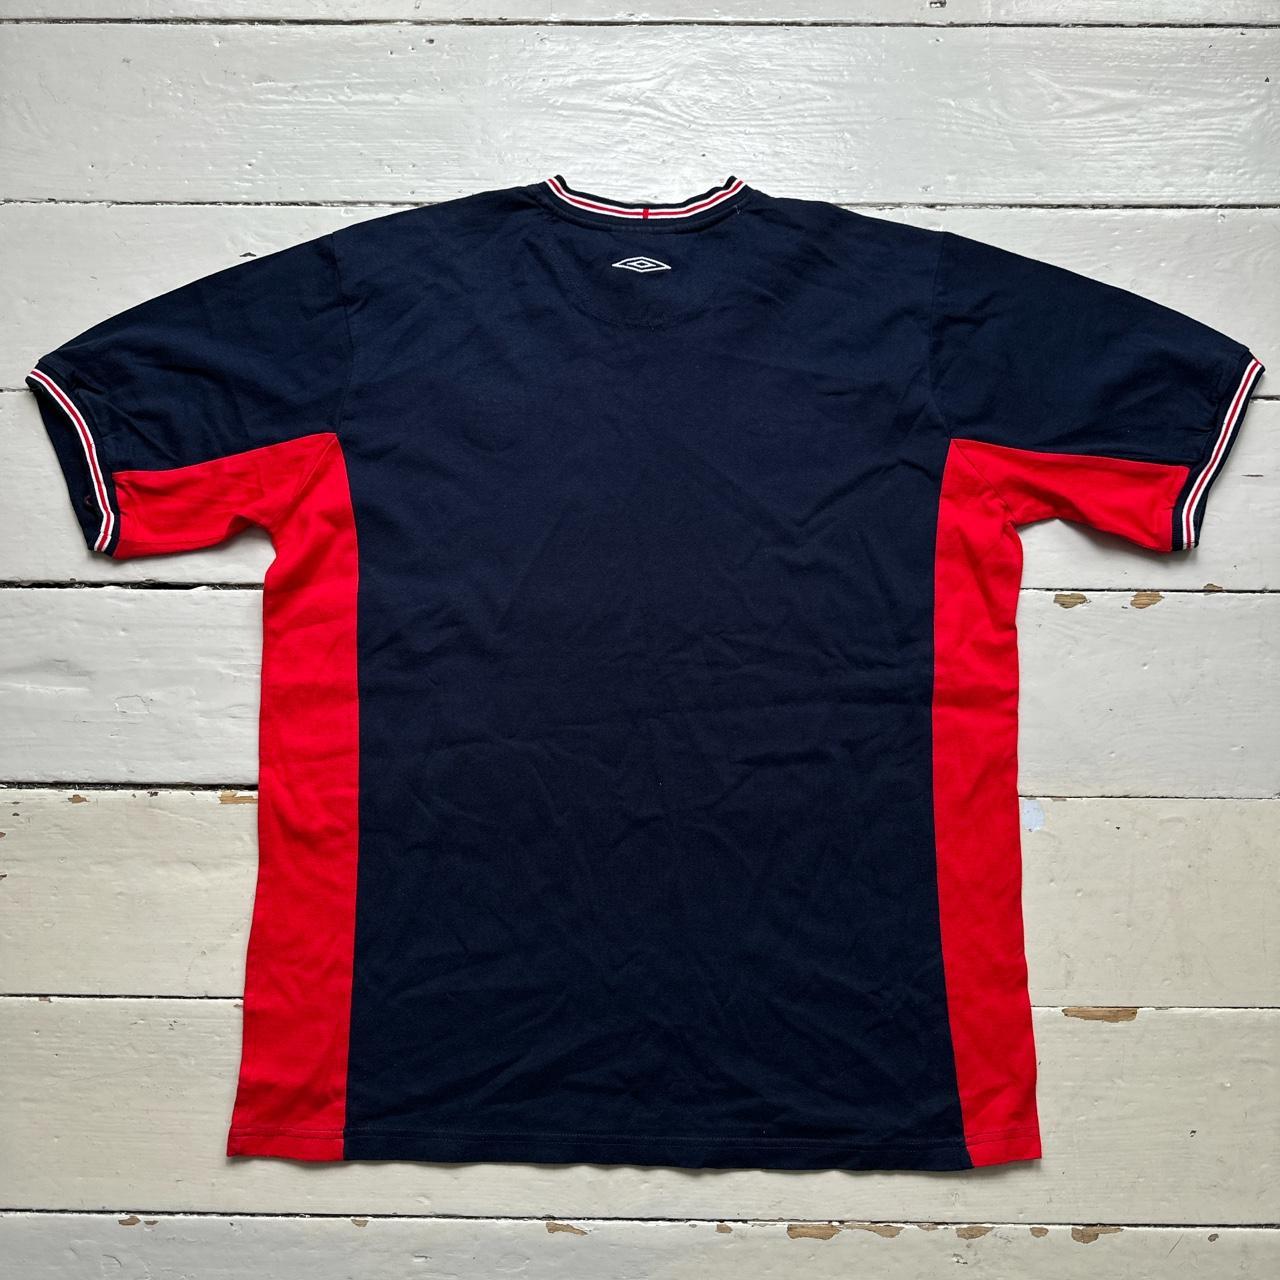 England Umbro Navy and Red Vintage Football T Shirt